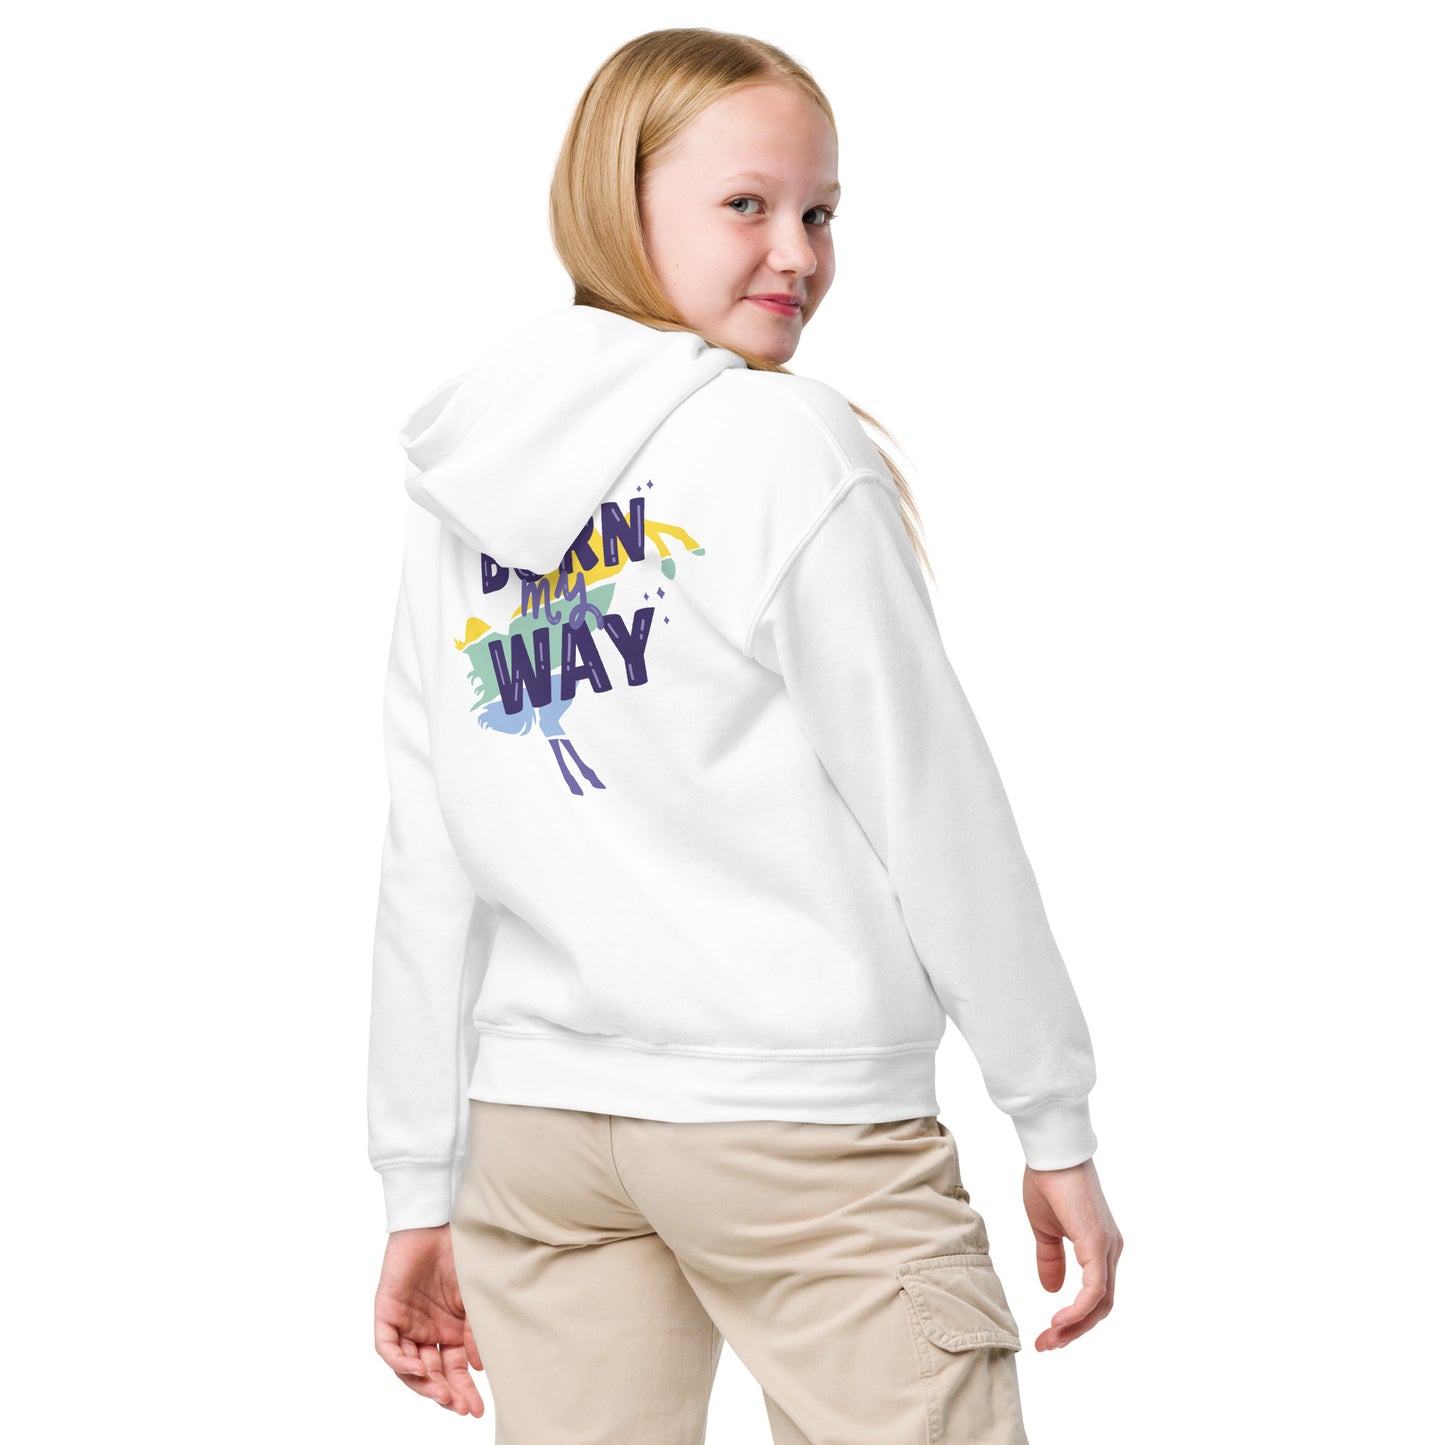 "Born my way" hoodie for children and young people